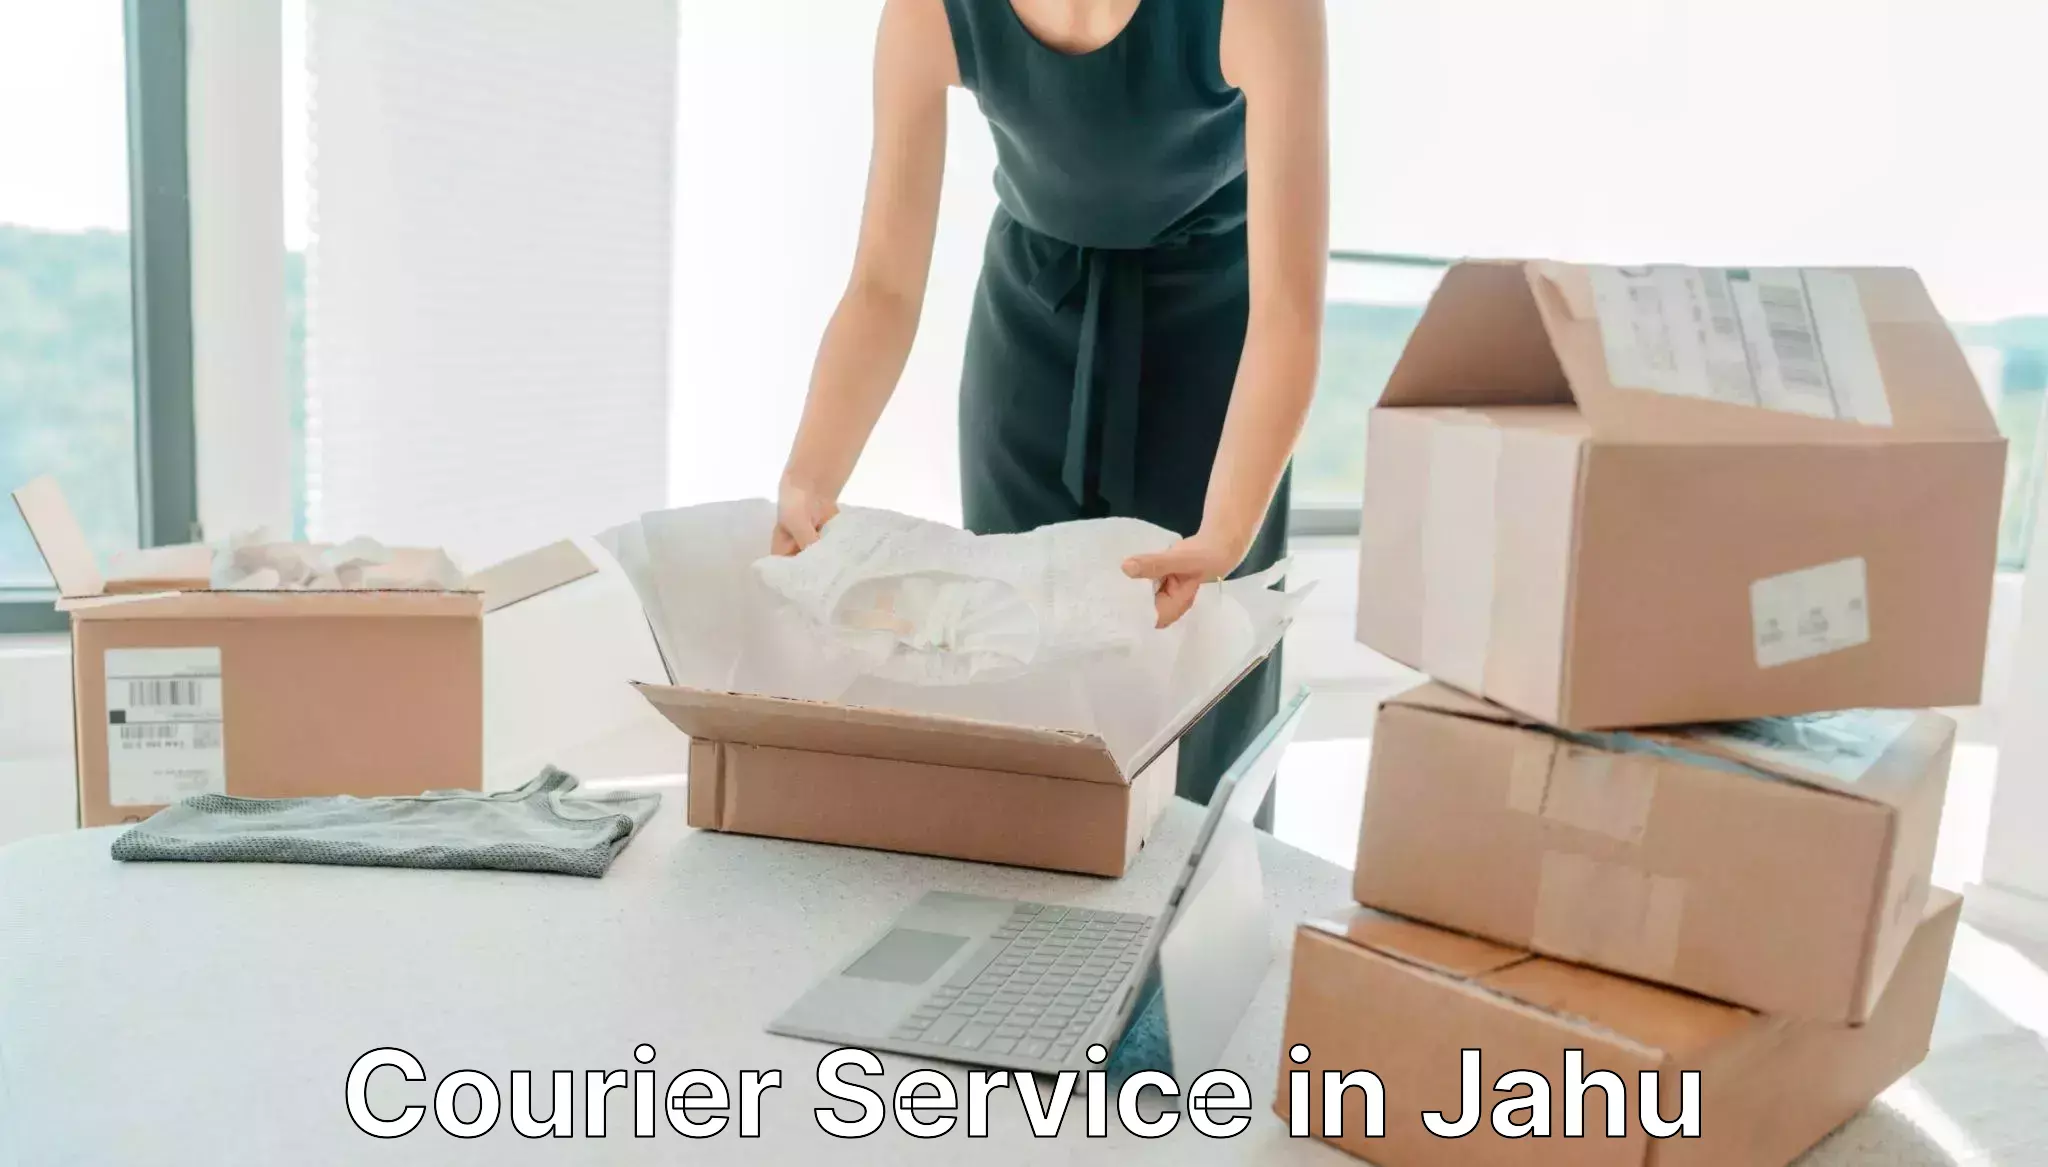 Fast shipping solutions in Jahu